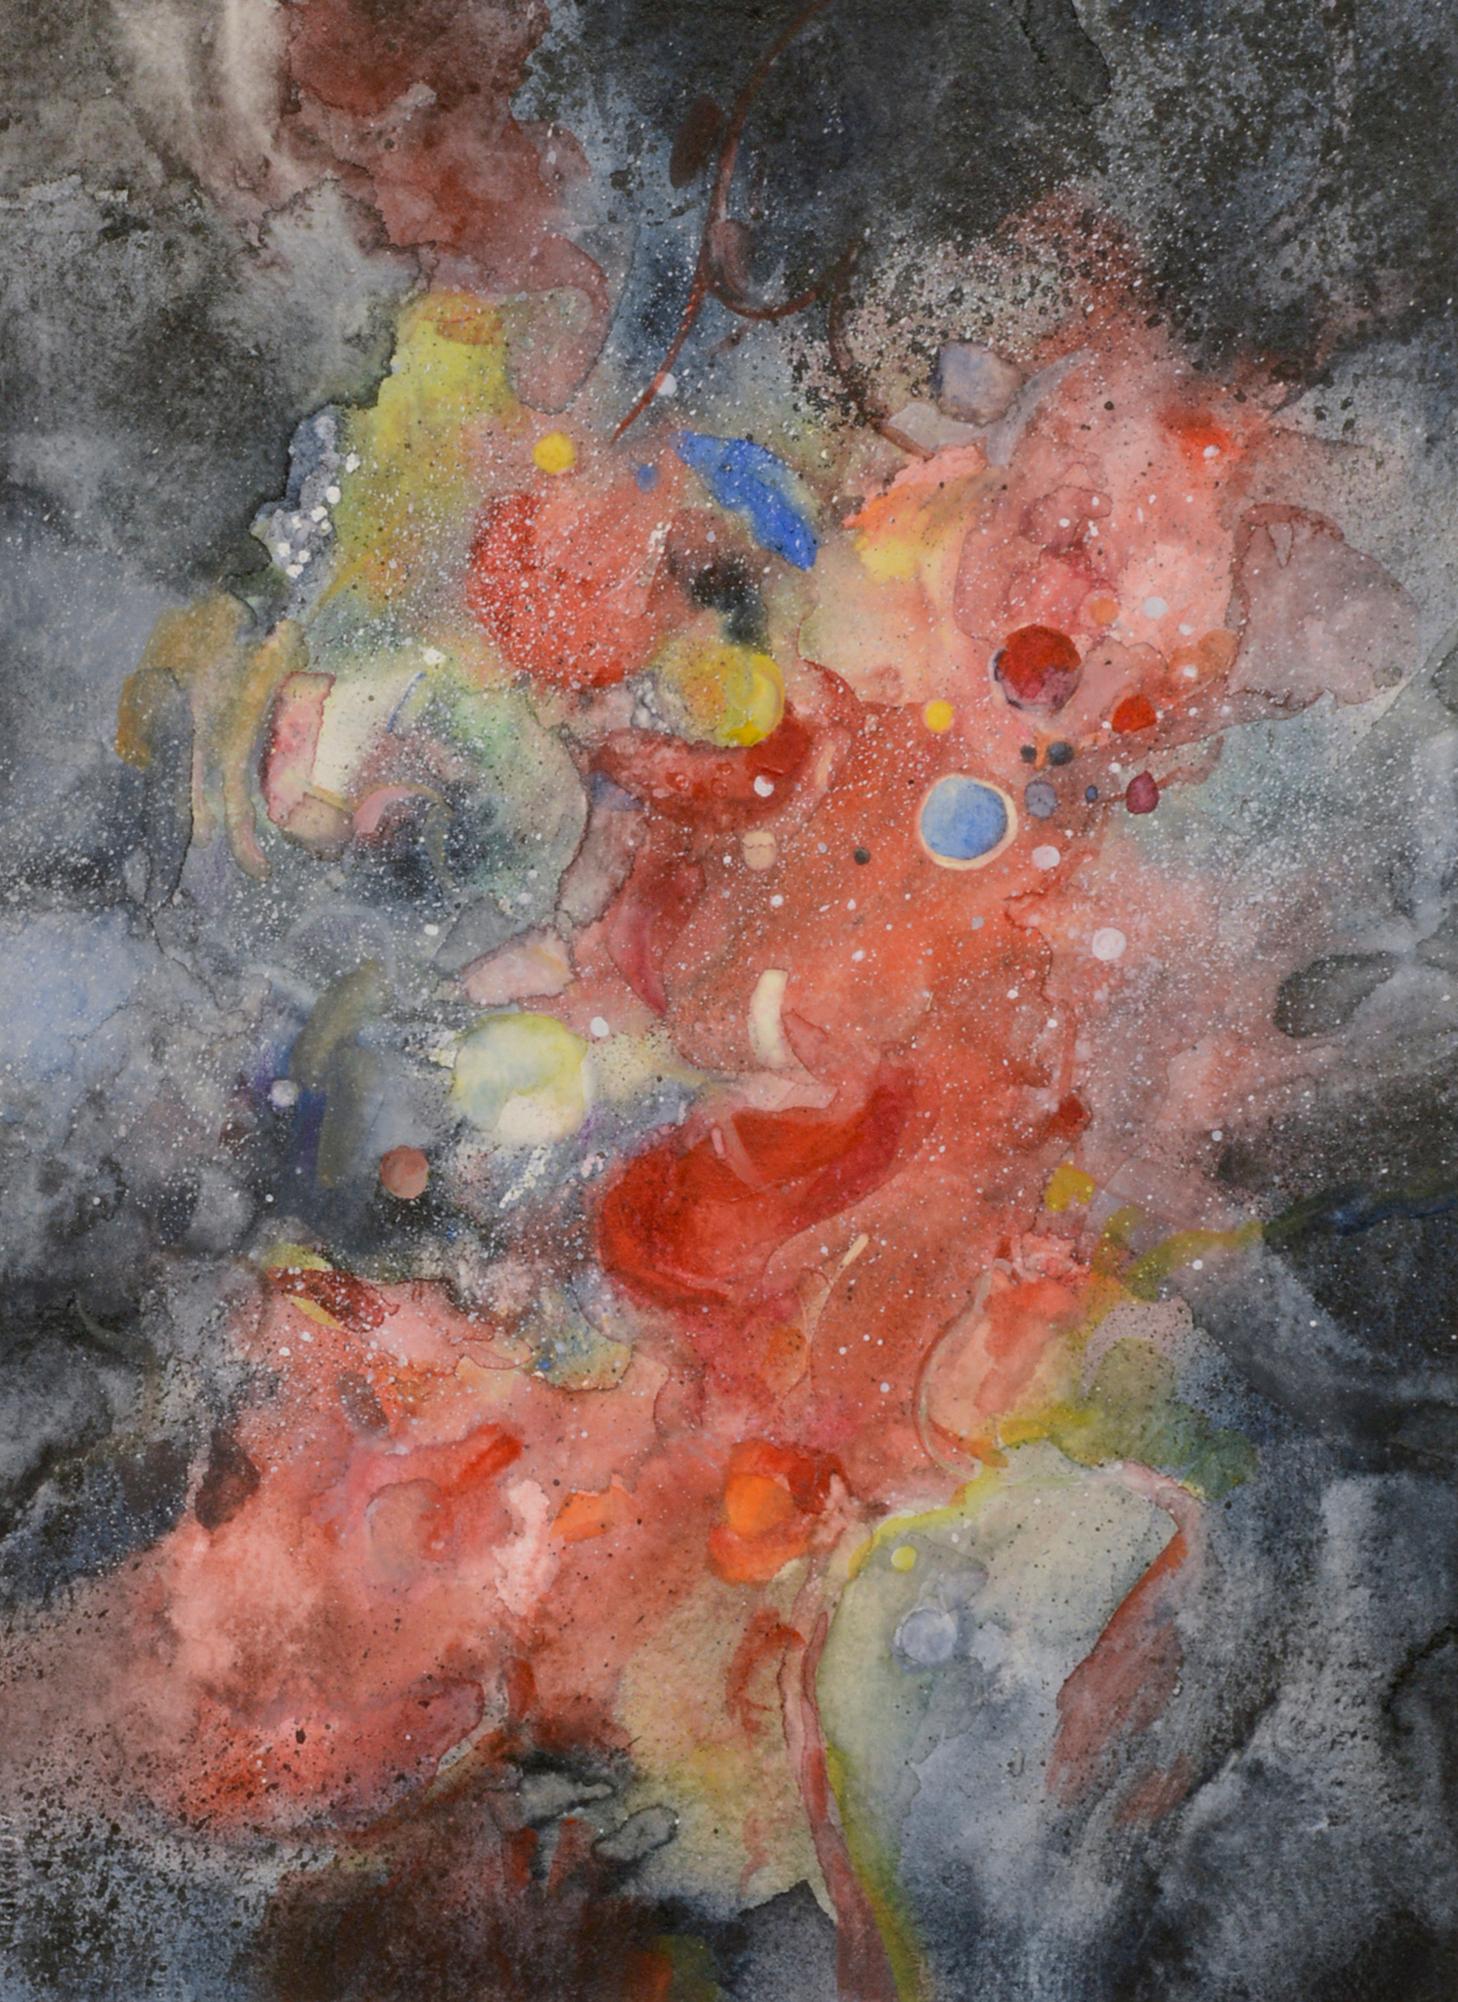 Evolution Orion Nebula (4) - Colorful Cosmic Flow Abstract - Painting by Marianne K. Brown